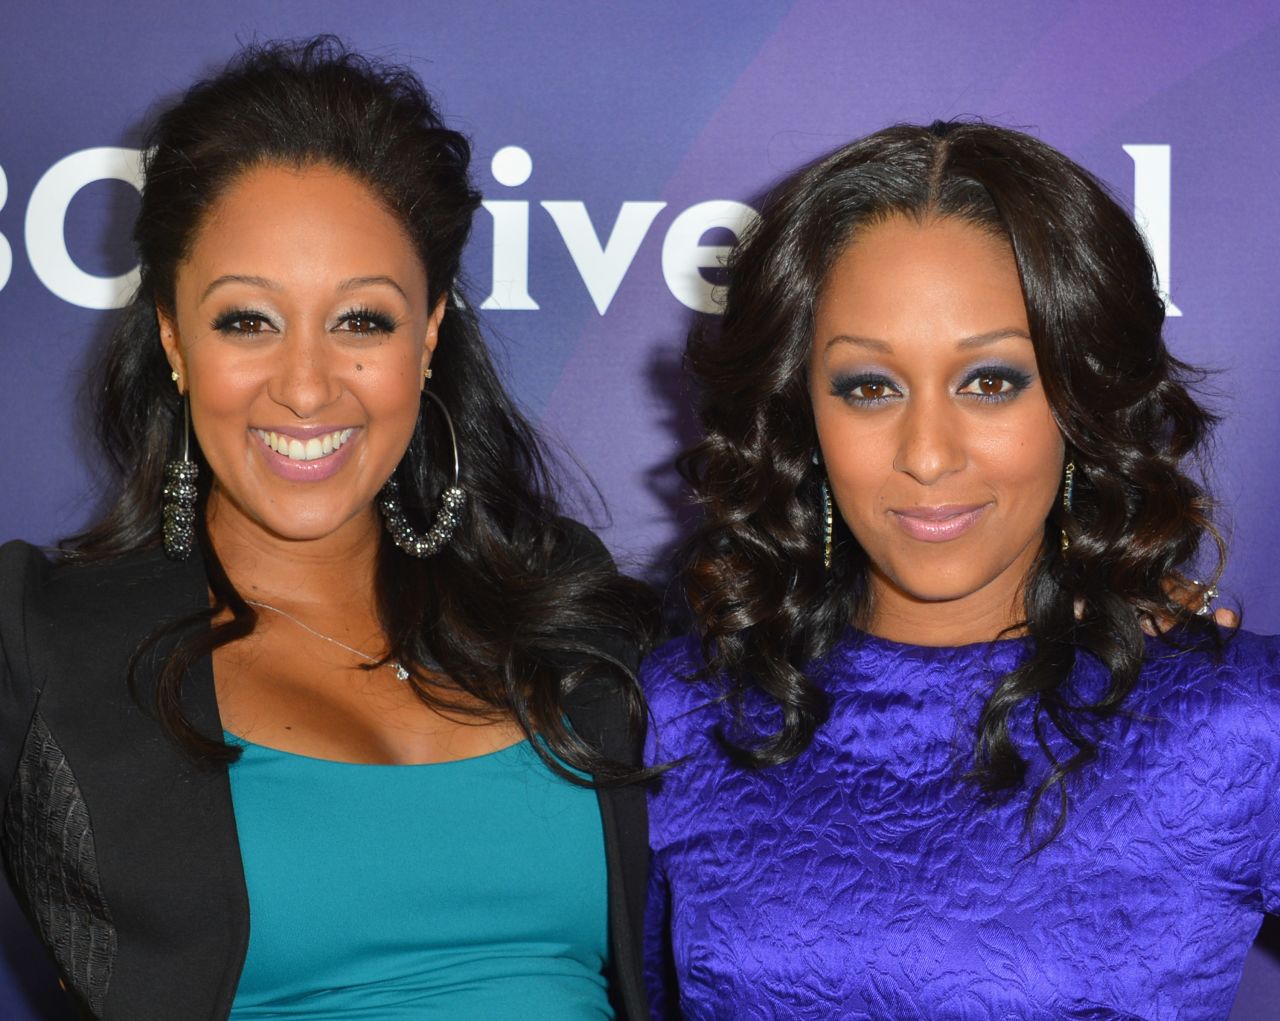 TV personalities Tamera Mowry-Housley and Tia Mowry-Hardrict grew up in the spotlight. When Mowry-Housley was criticized for her marriage to a white man, <a href="http://www.oprah.com/own-where-are-they-now/Tamera-Mowry-Responds-to-Critics-of-Her-Interracial-Marriage-Video" target="_blank" target="_blank">she was emotional</a> on "Oprah: Where are they now?"  "My mom is a beautiful black woman and my dad is an amazing white man, and I grew up seeing a family," <a href="http://www.huffingtonpost.com/2014/01/13/tamera-mowry-marriage_n_4578025.html" target="_blank" target="_blank">Mowry-Housley said</a>. 